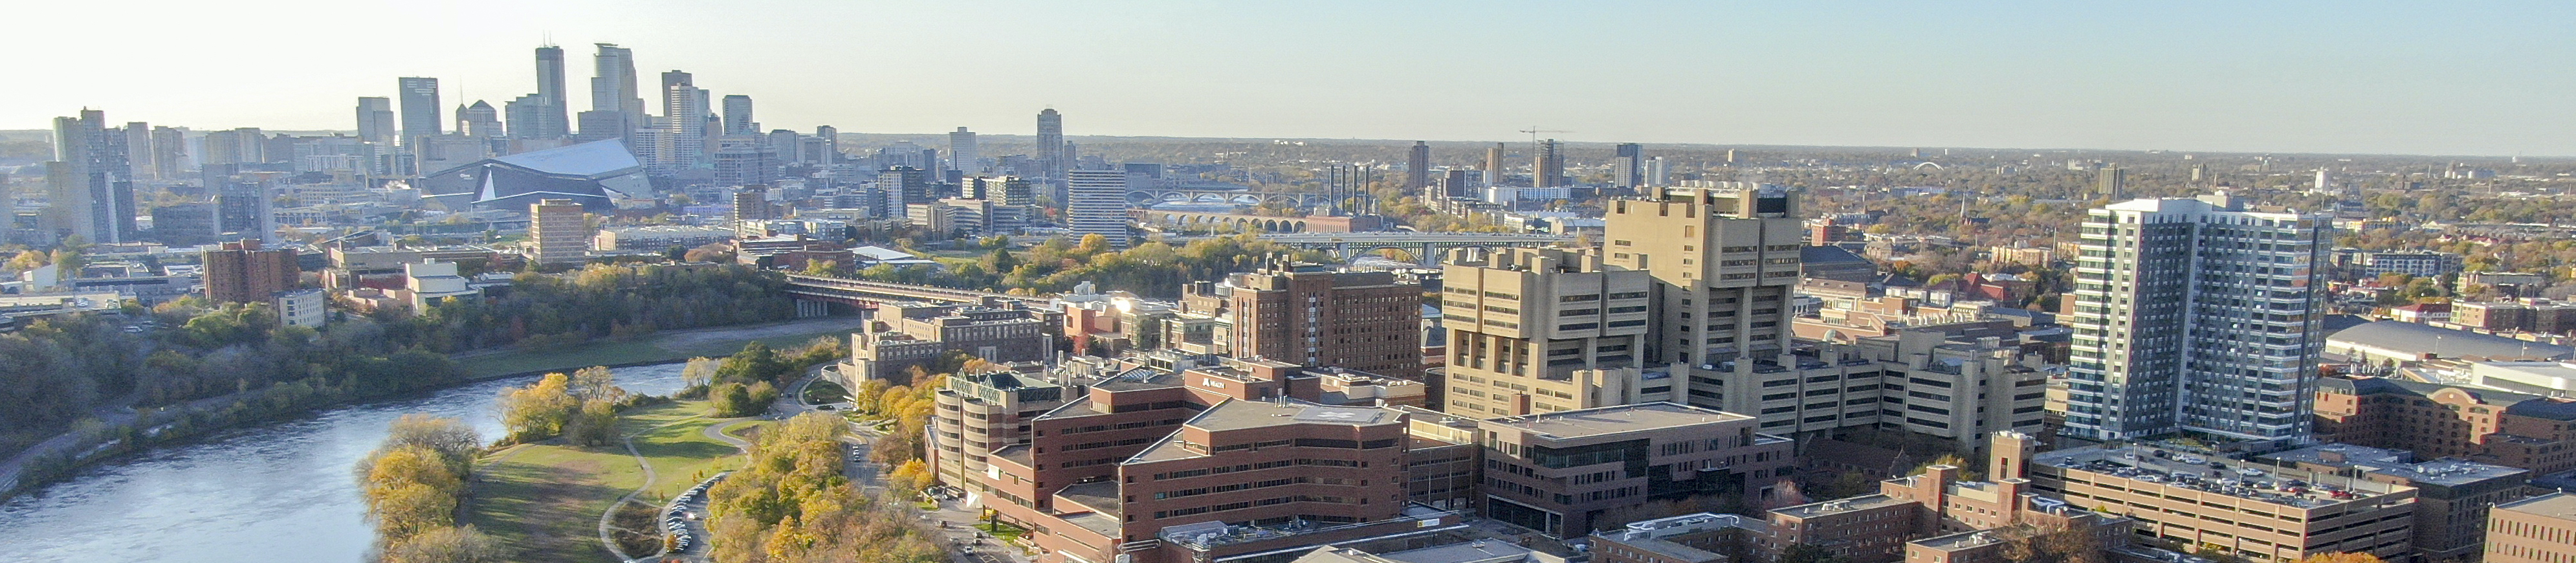 Aerial view of the University of Minnesota Minneapolis campus